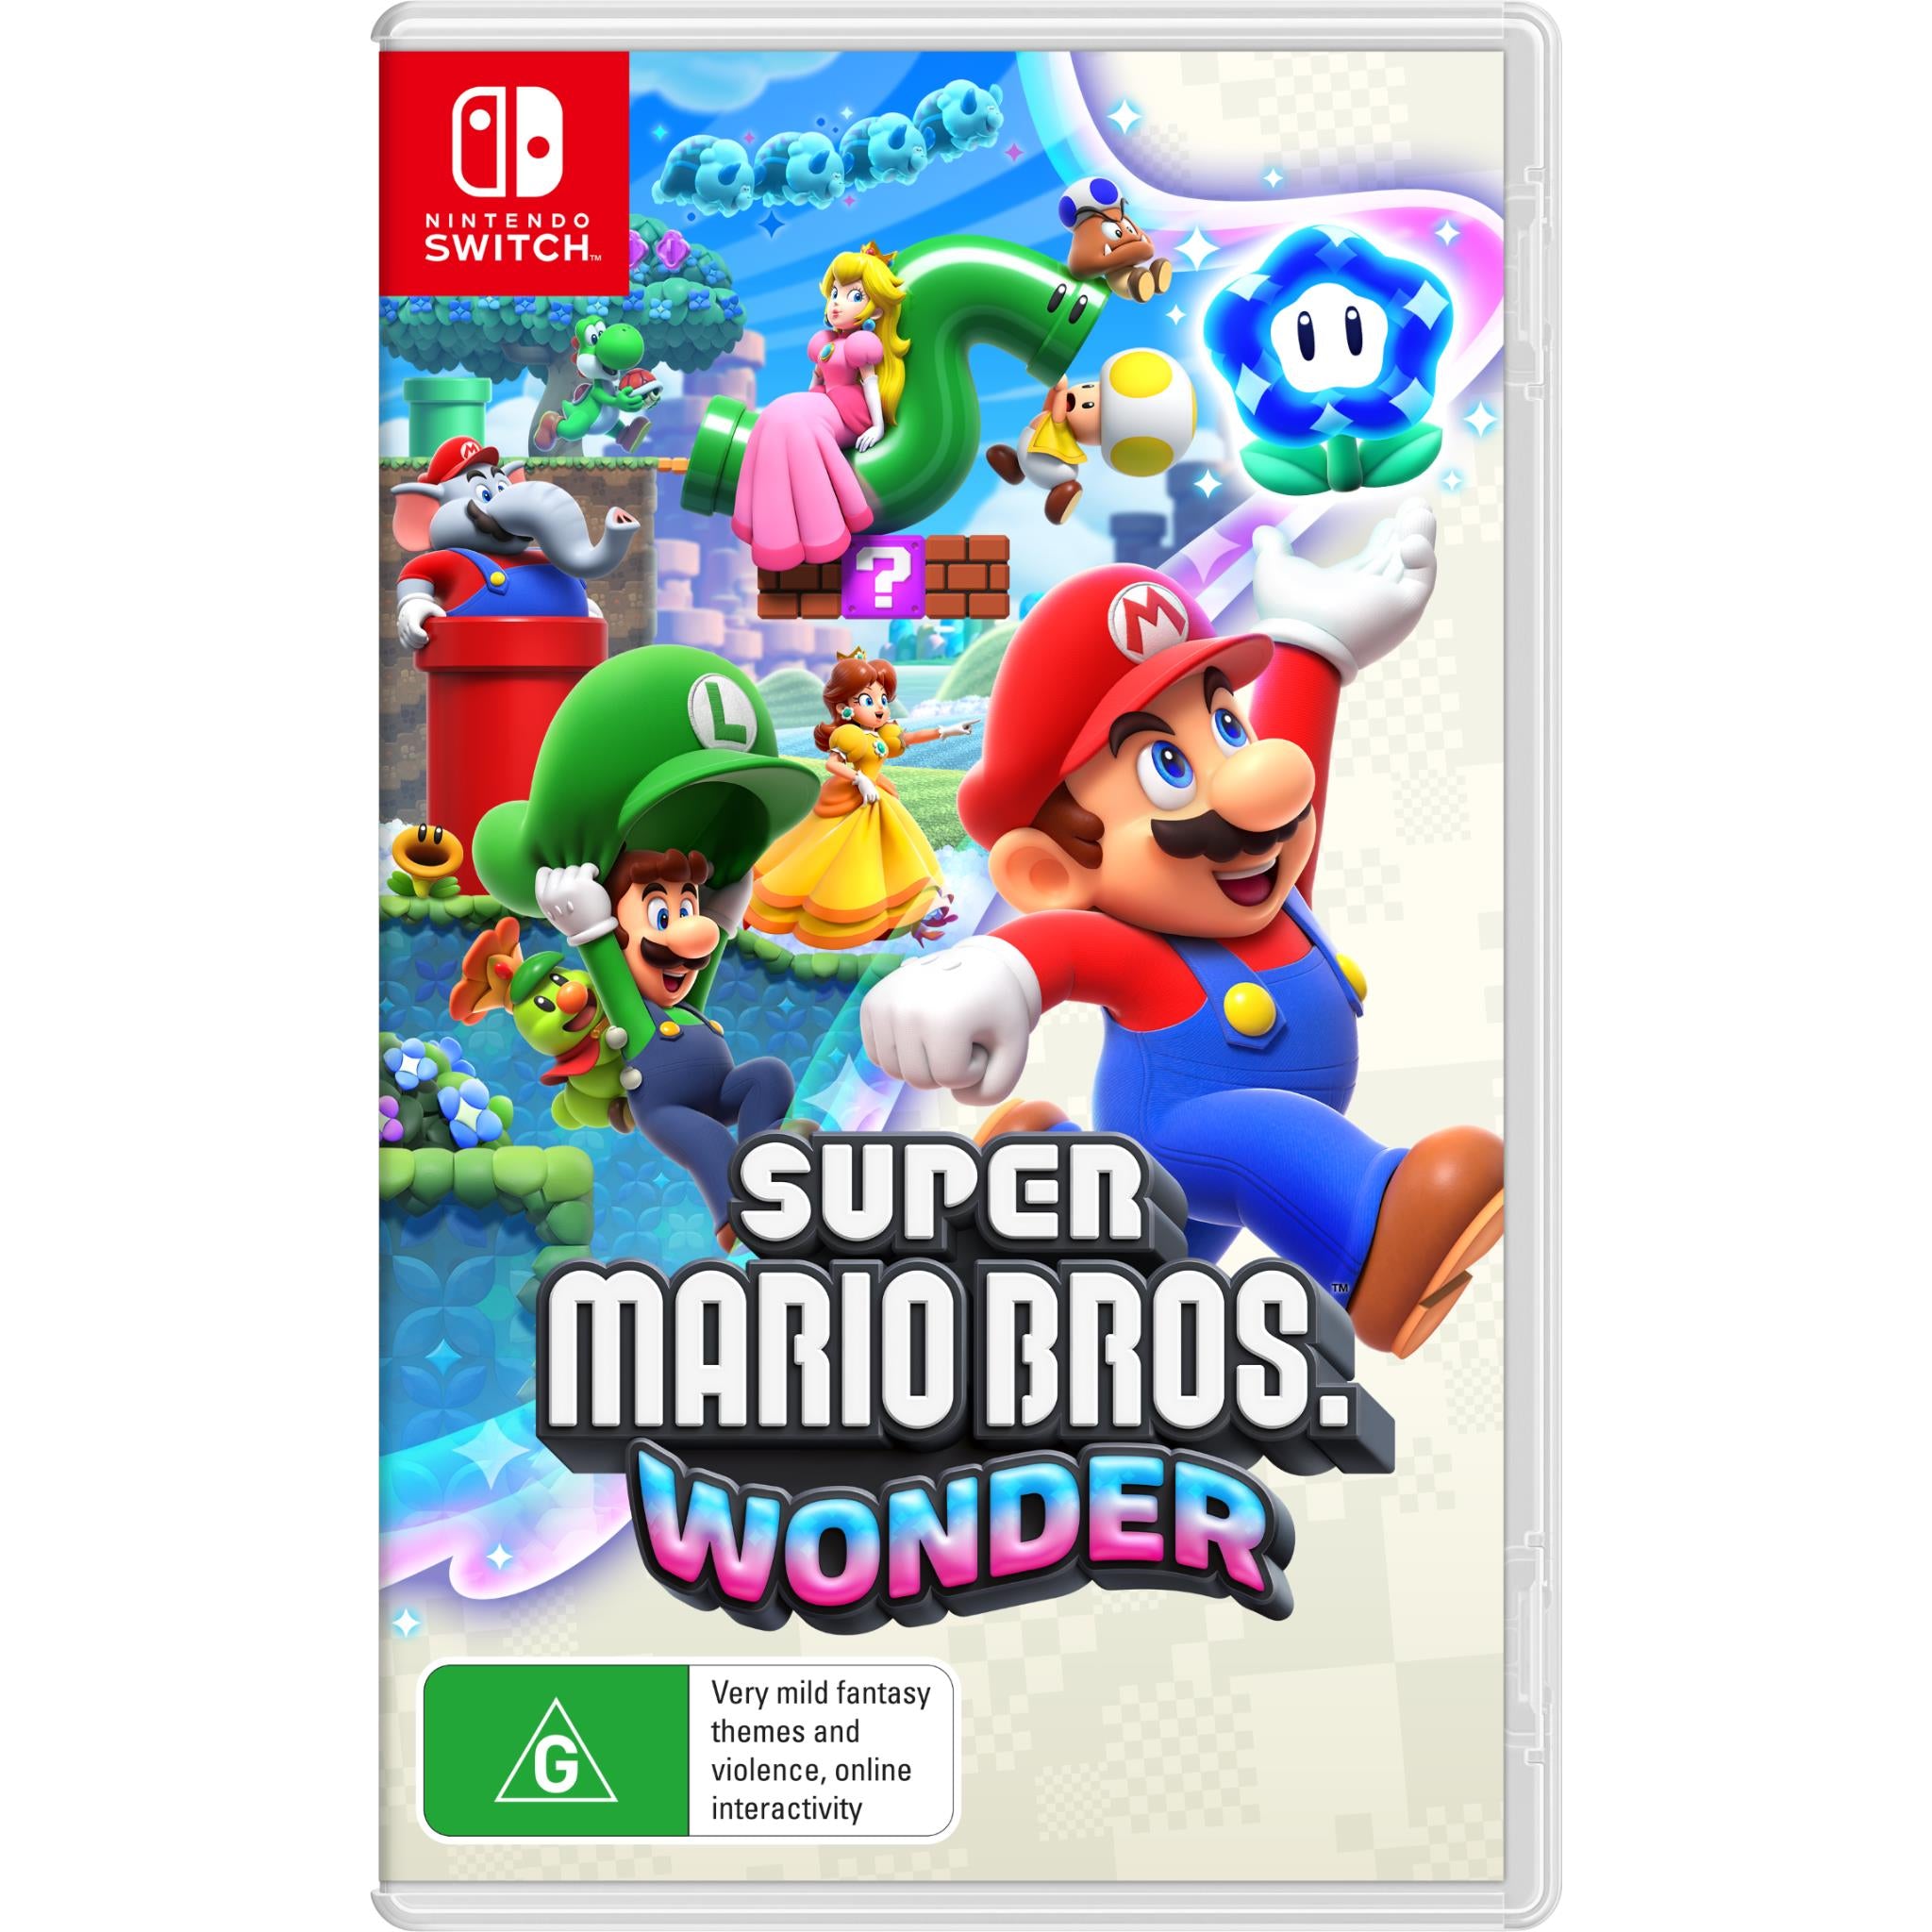 Super Mario Odyssey™ for the Nintendo Switch™ home gaming system - Official  Game Site